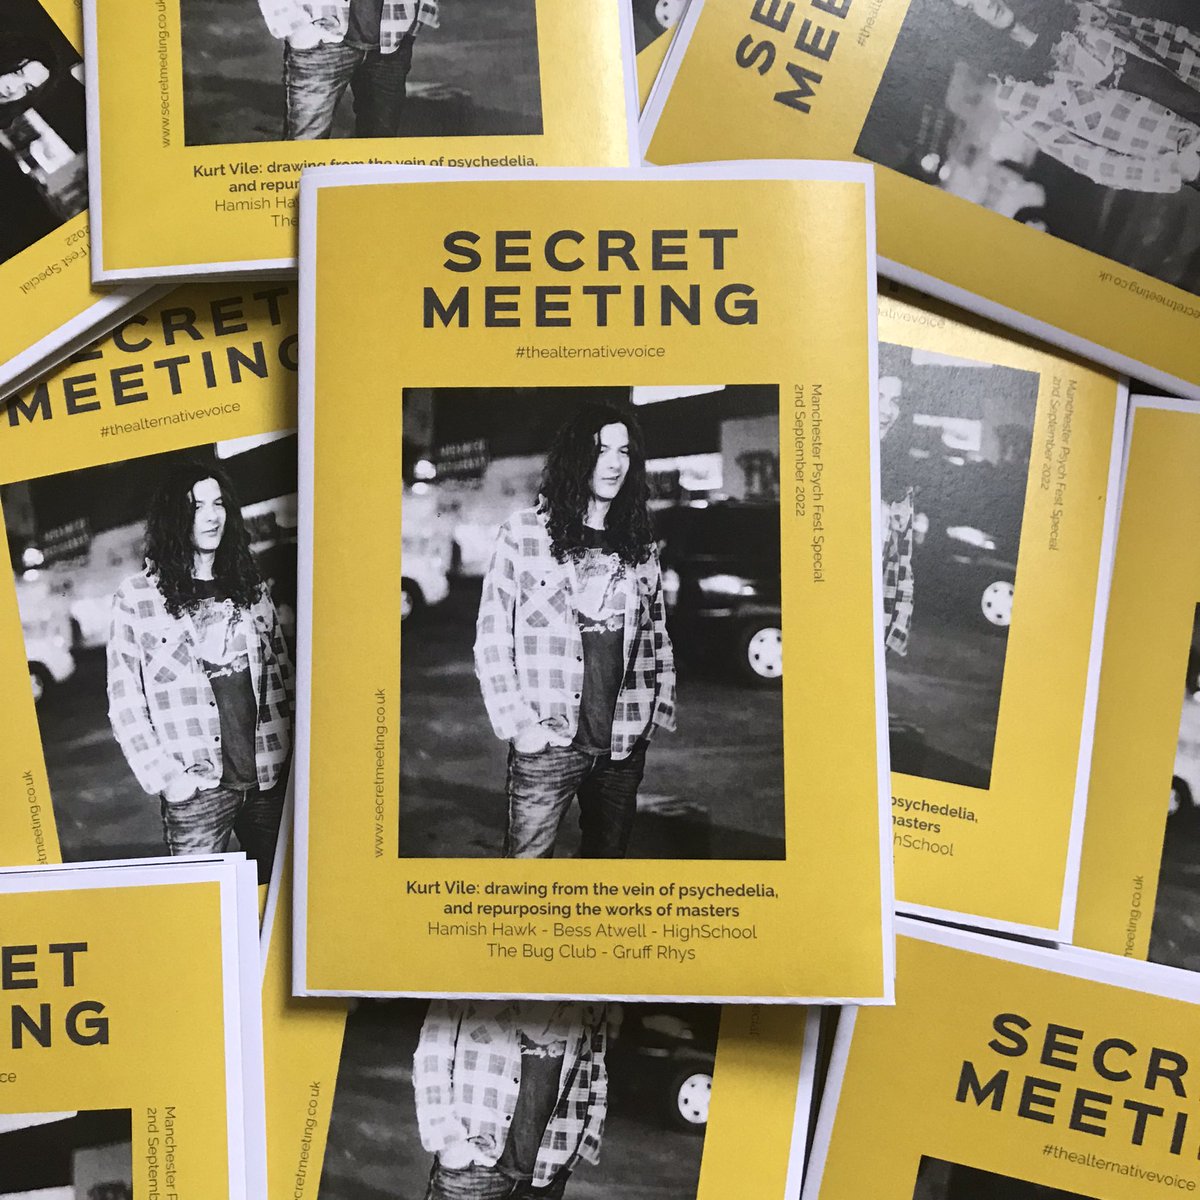 Say hello to our new Zine! 👋🏻 Ft. an exclusive cover interview with @KurtVile + @HHawkOfficial @BessAtwell @DallianceRecs @thebugclubband @gruffingtonpost On sale/subscribe: secretmeeting.co.uk/mpf22 A special thank you to @mergerecords, @hitthenorthrecs & our writers!